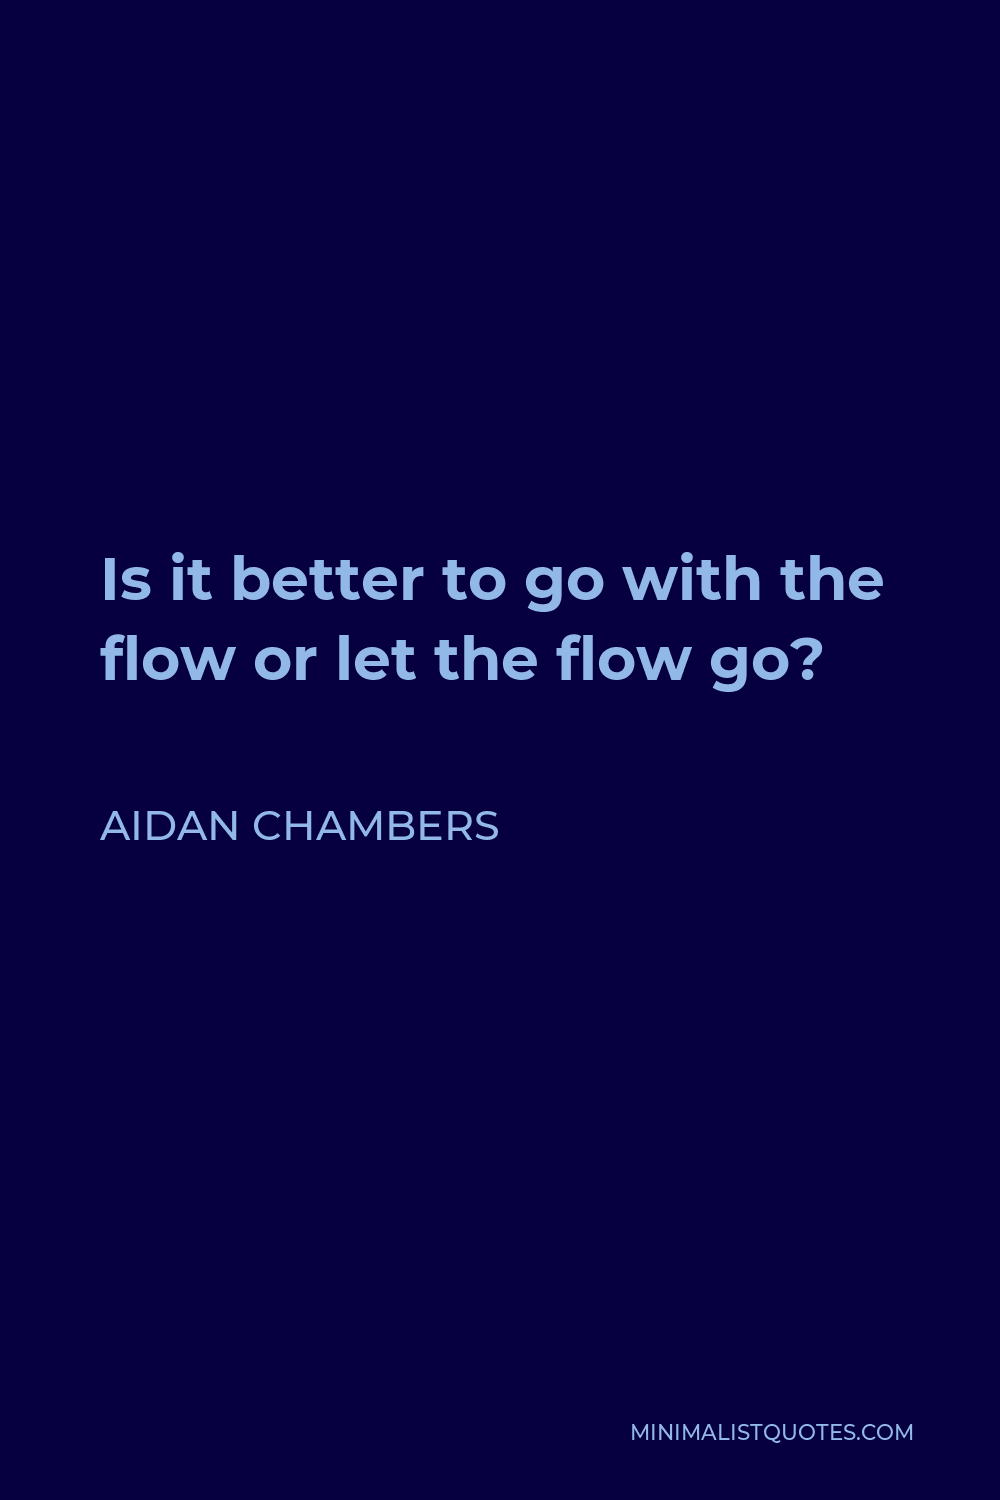 Aidan Chambers Quote - Is it better to go with the flow or let the flow go?